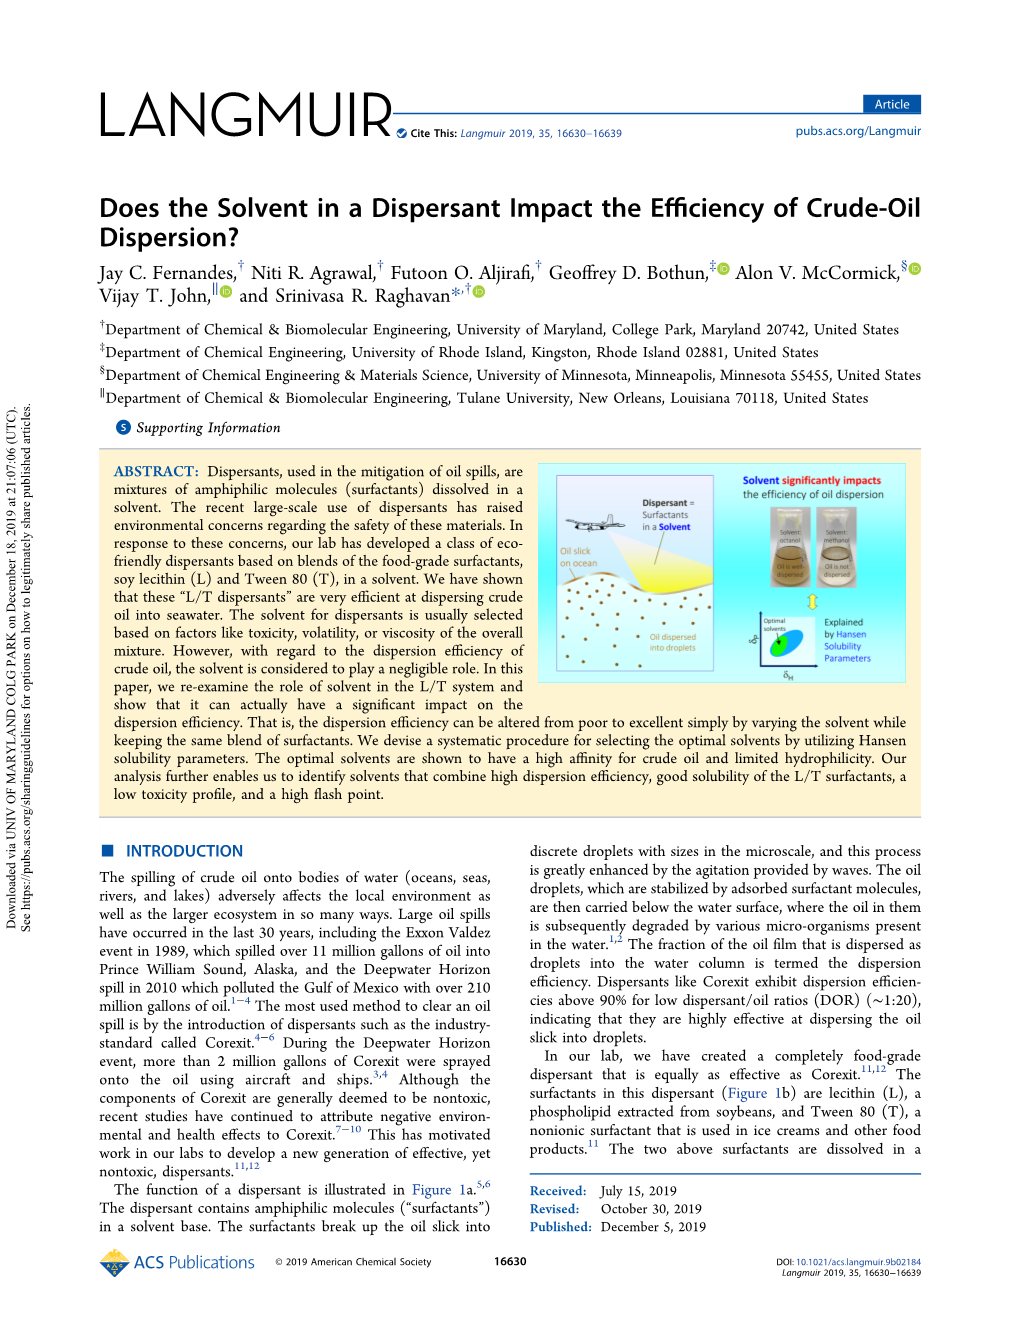 Does the Solvent in a Dispersant Impact the Efficiency of Crude-Oil Dispersion?